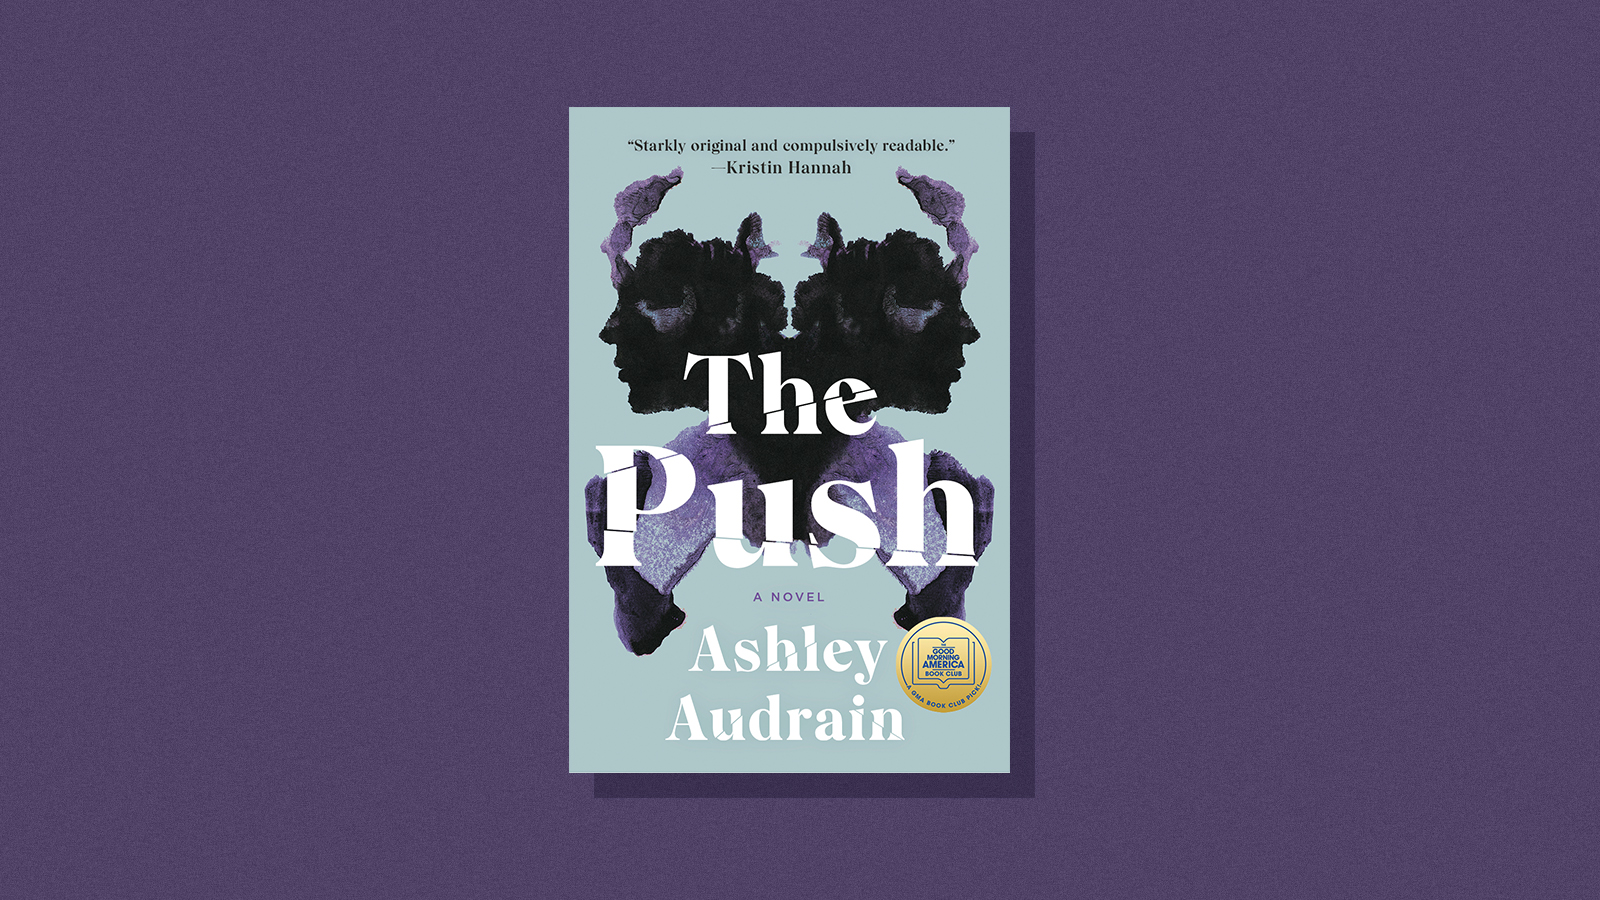 'The Push' by Ashley Audrain